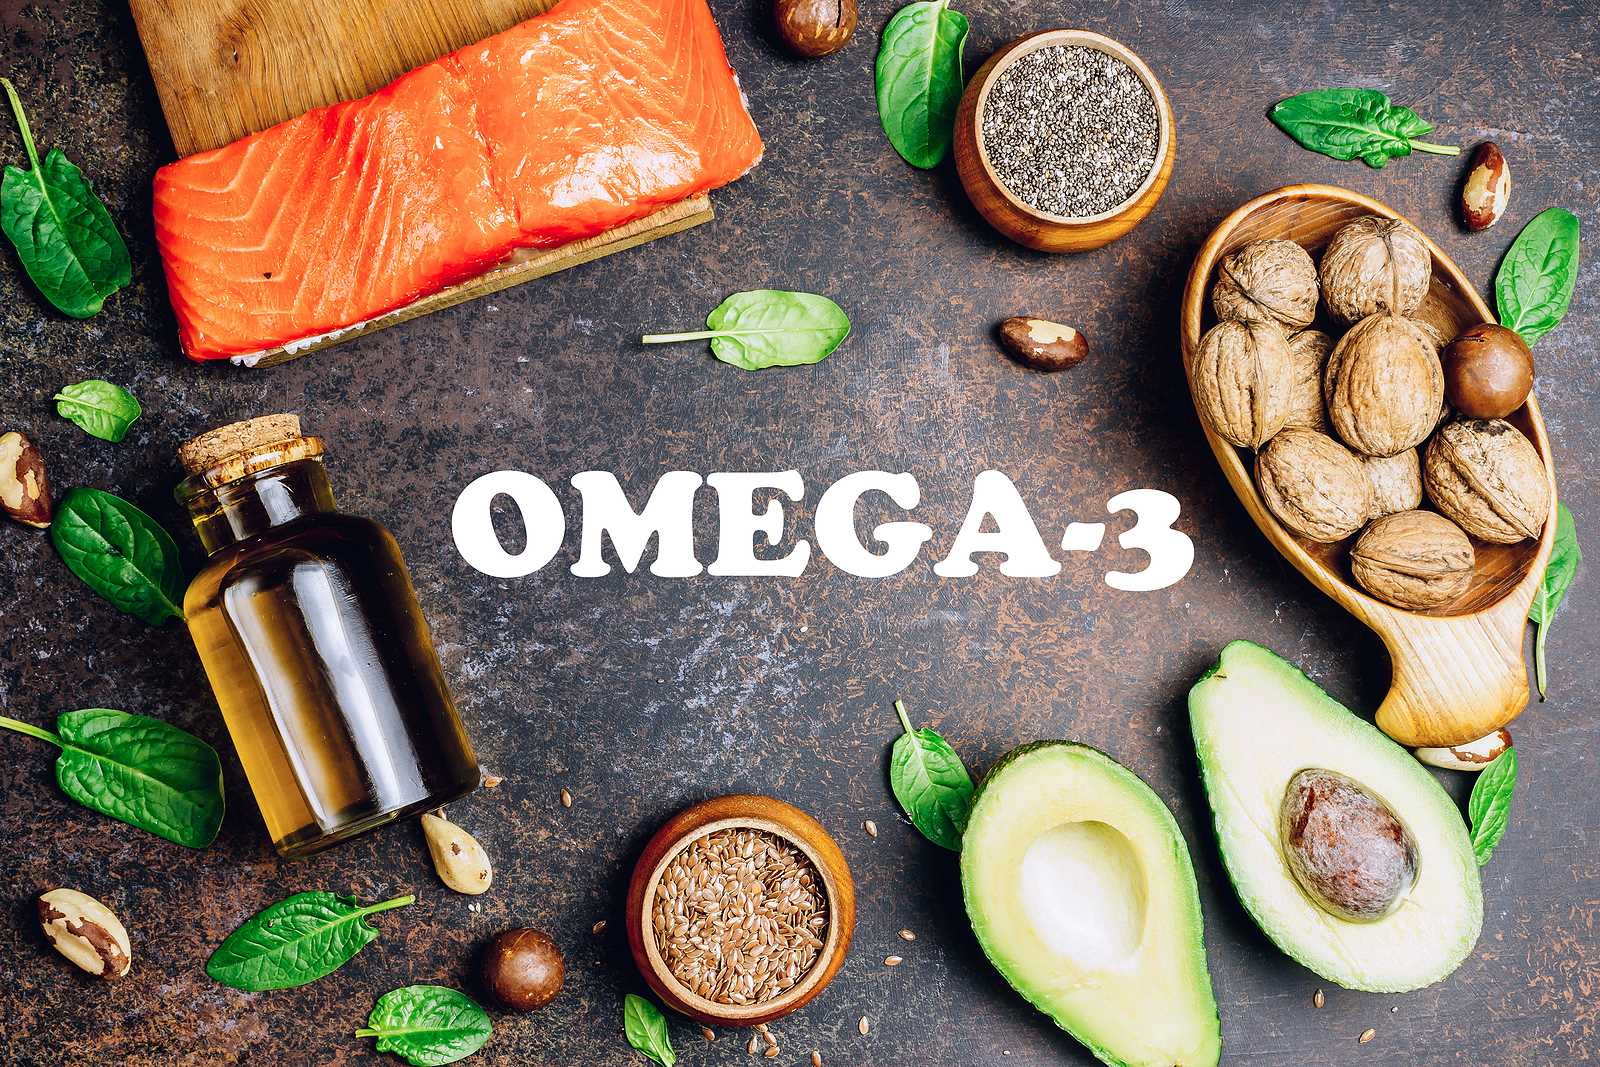 Food items with omega 3